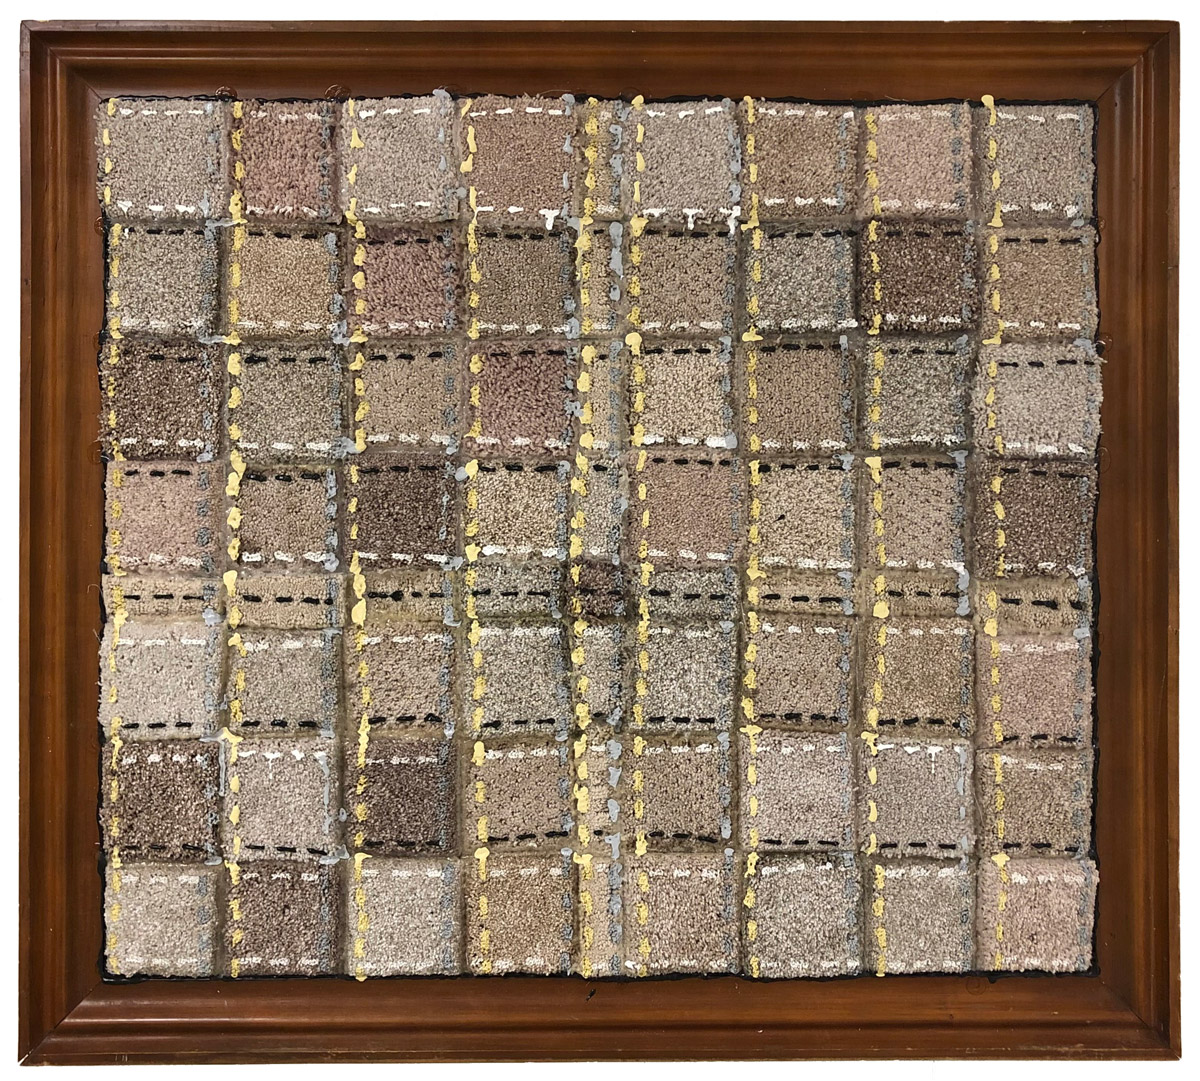 A 56 square grid of carpet samples with white, yellow, blue, and black acrylic paint that resemble stitches. Carpet is inside of a brown wooden frame.